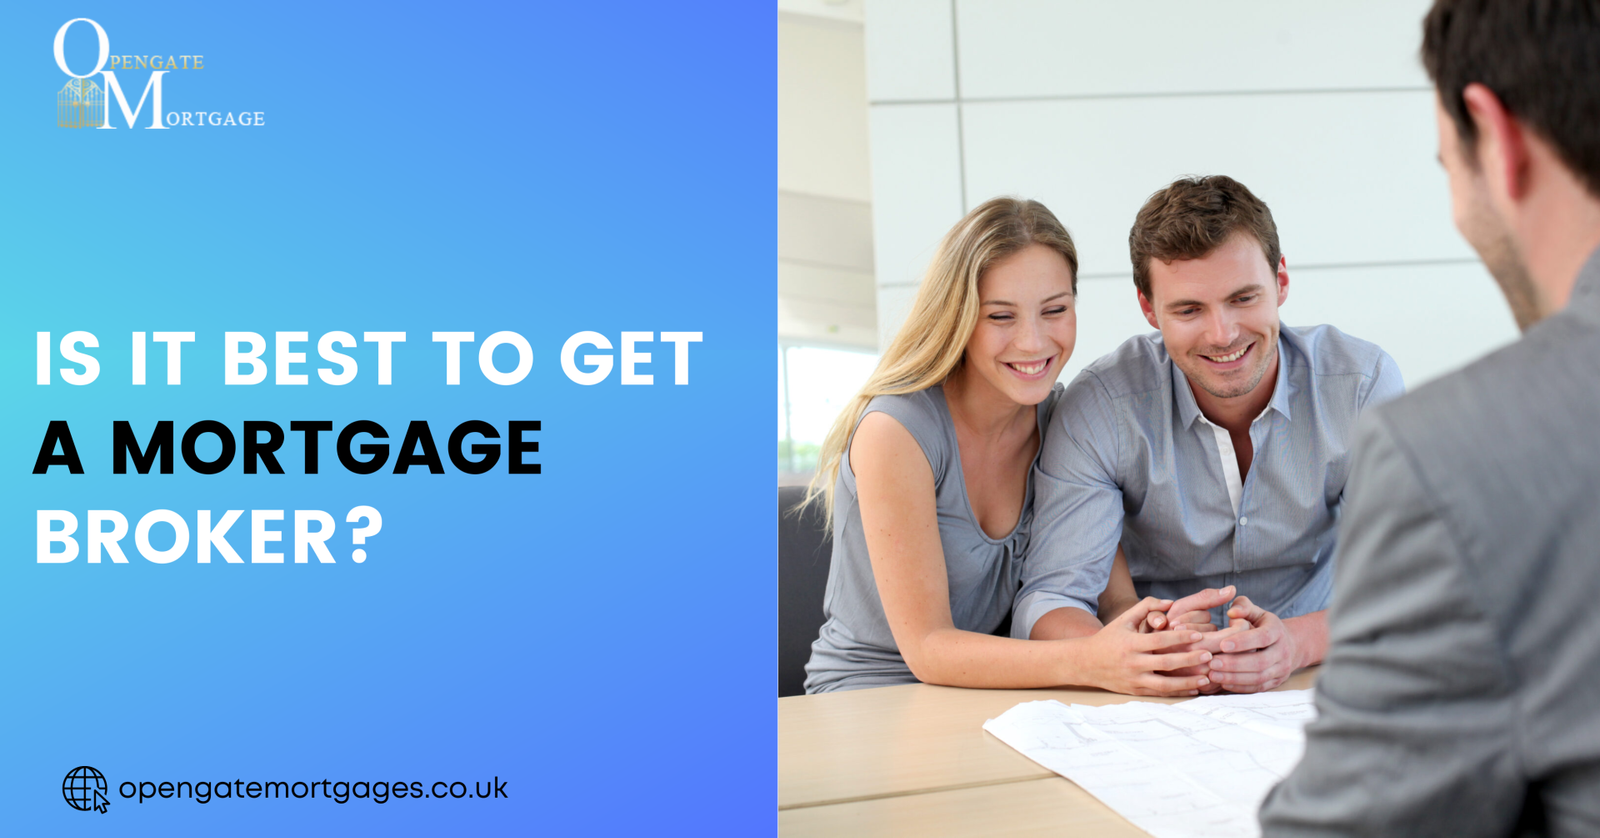 Is It Best To Get a Mortgage Broker?